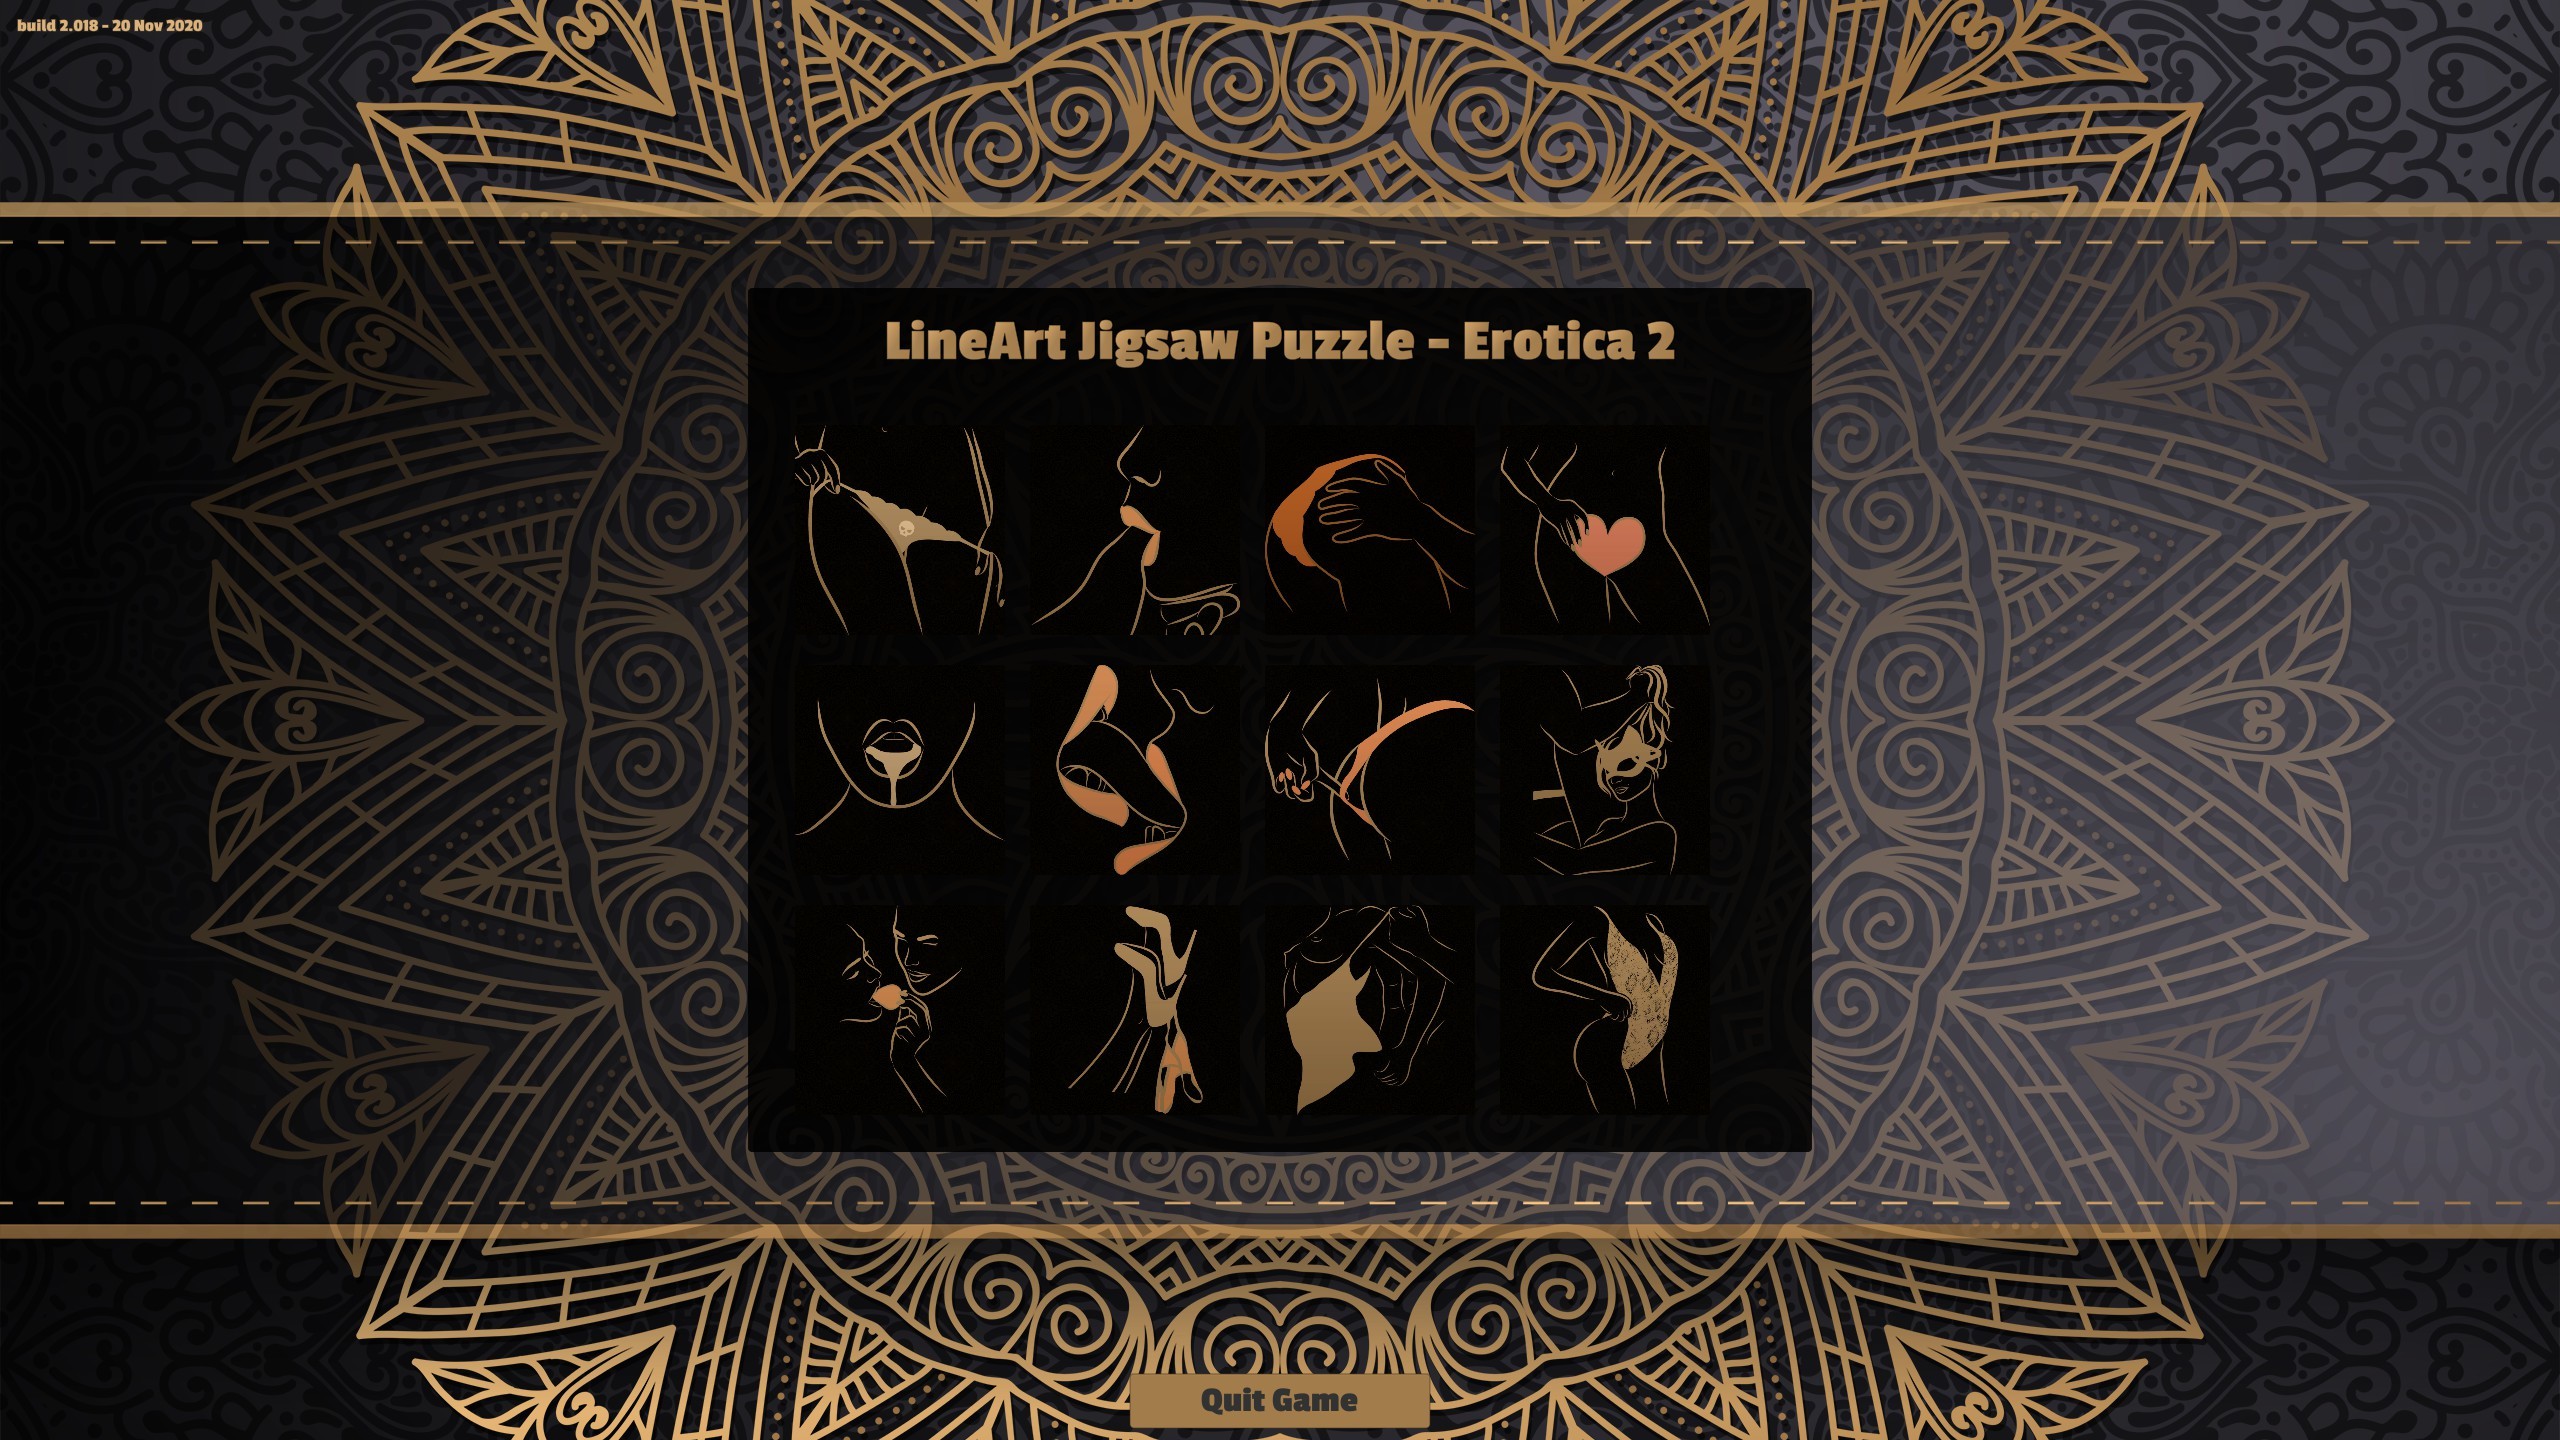 LineArt Jigsaw Puzzle - Erotica 2 Steam CD Key